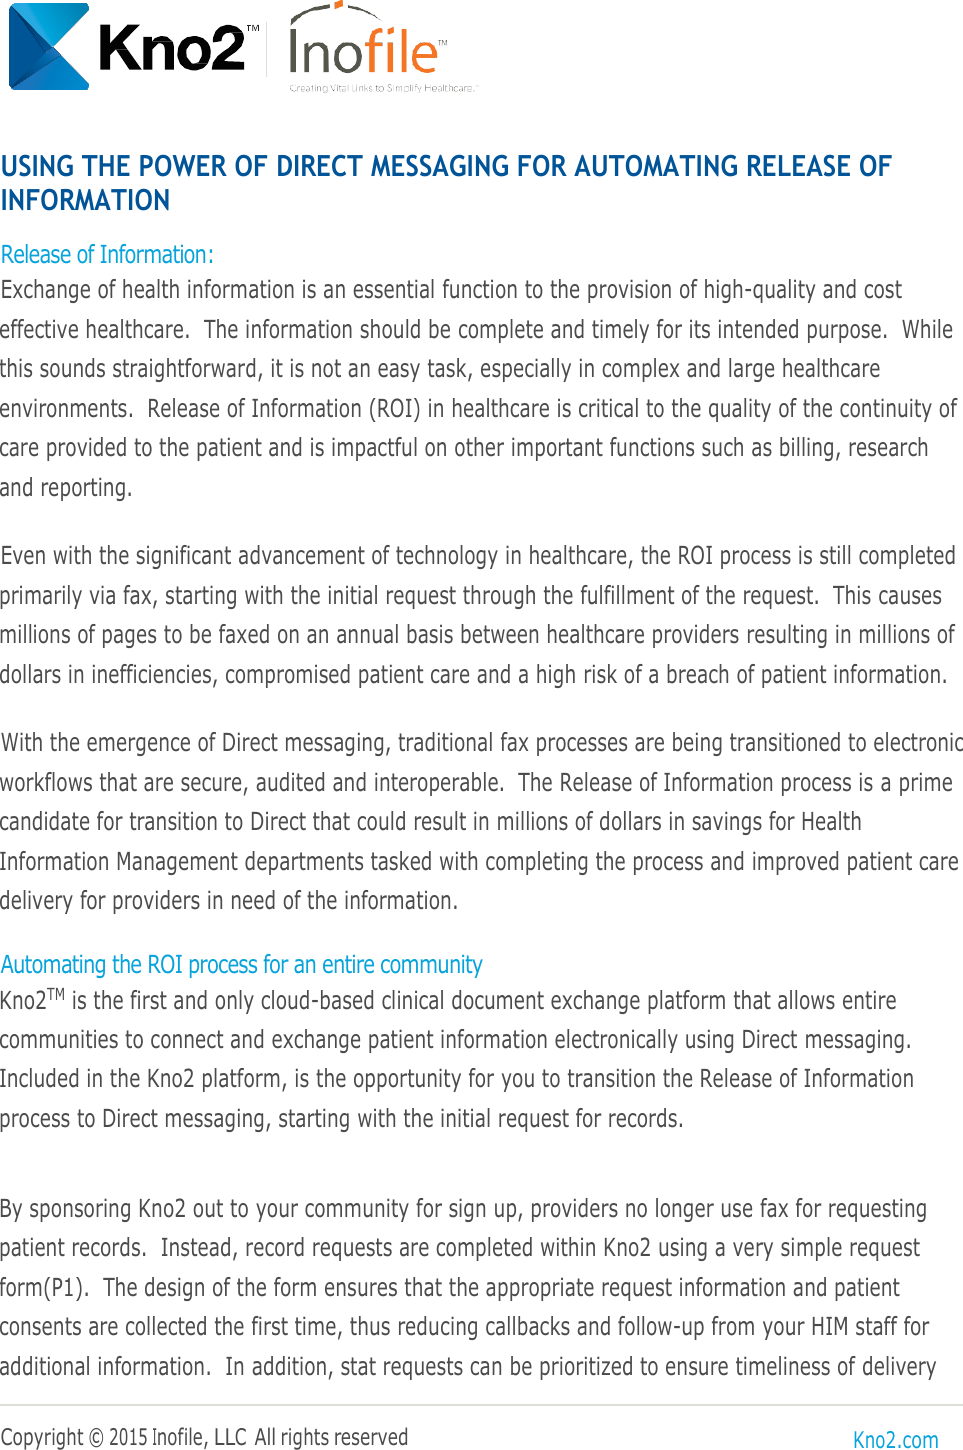 Page 1 of 3 - Fujitsu Kno2 Direct Messaging - Patient Record Requests Healthcare READ MORE Records Request Overview